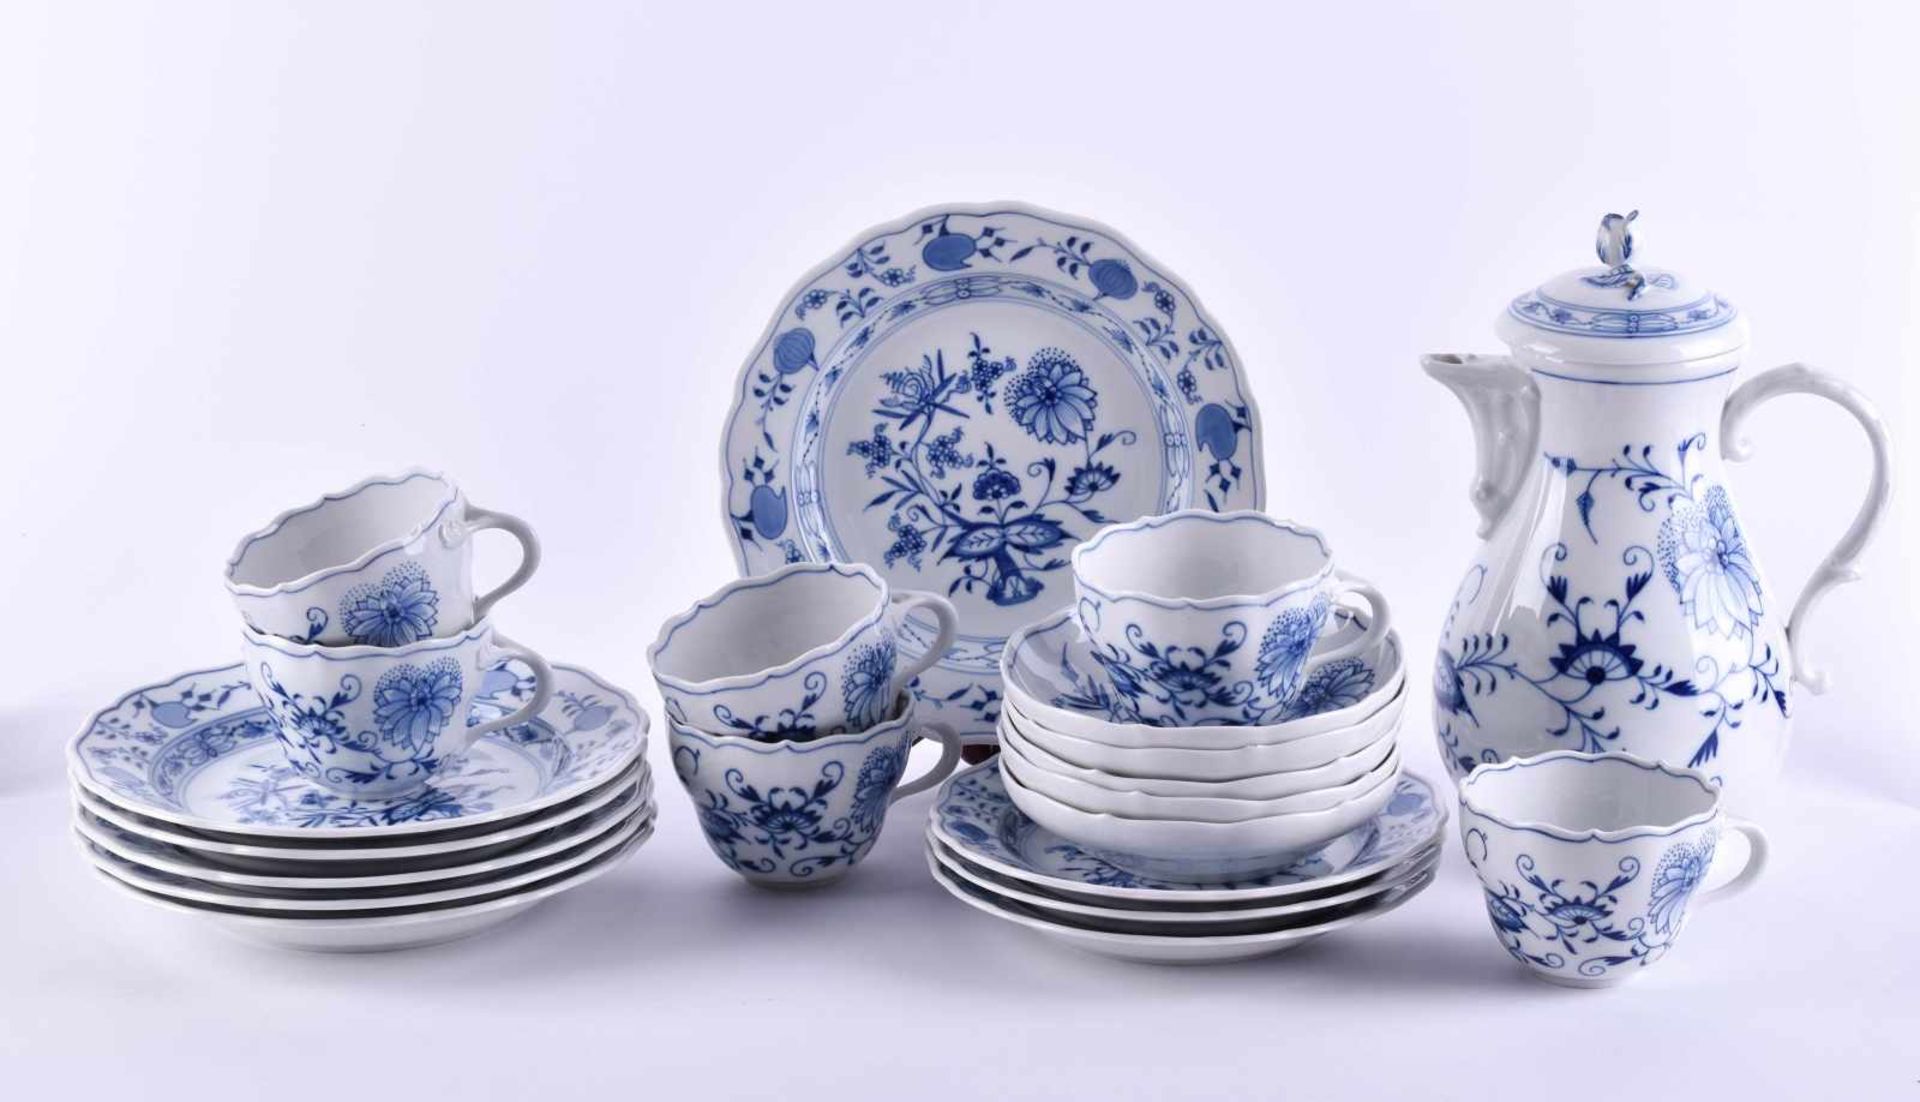 Remains of a Meissen coffee service22 pieces., decor Zwiebelmuster, includes 7 cups, 5 saucers 1